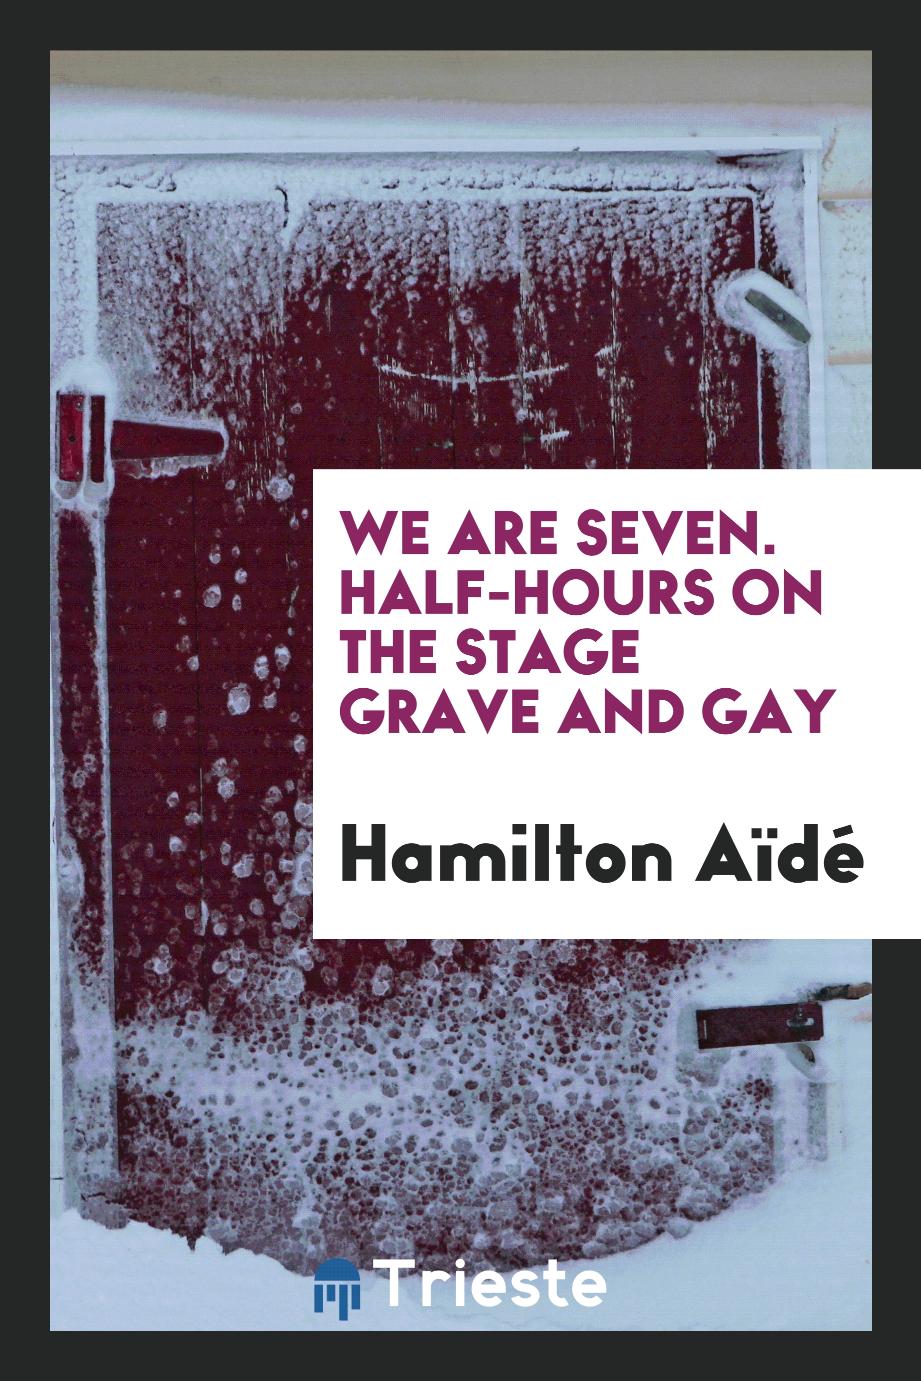 We are seven. Half-hours on the stage grave and gay